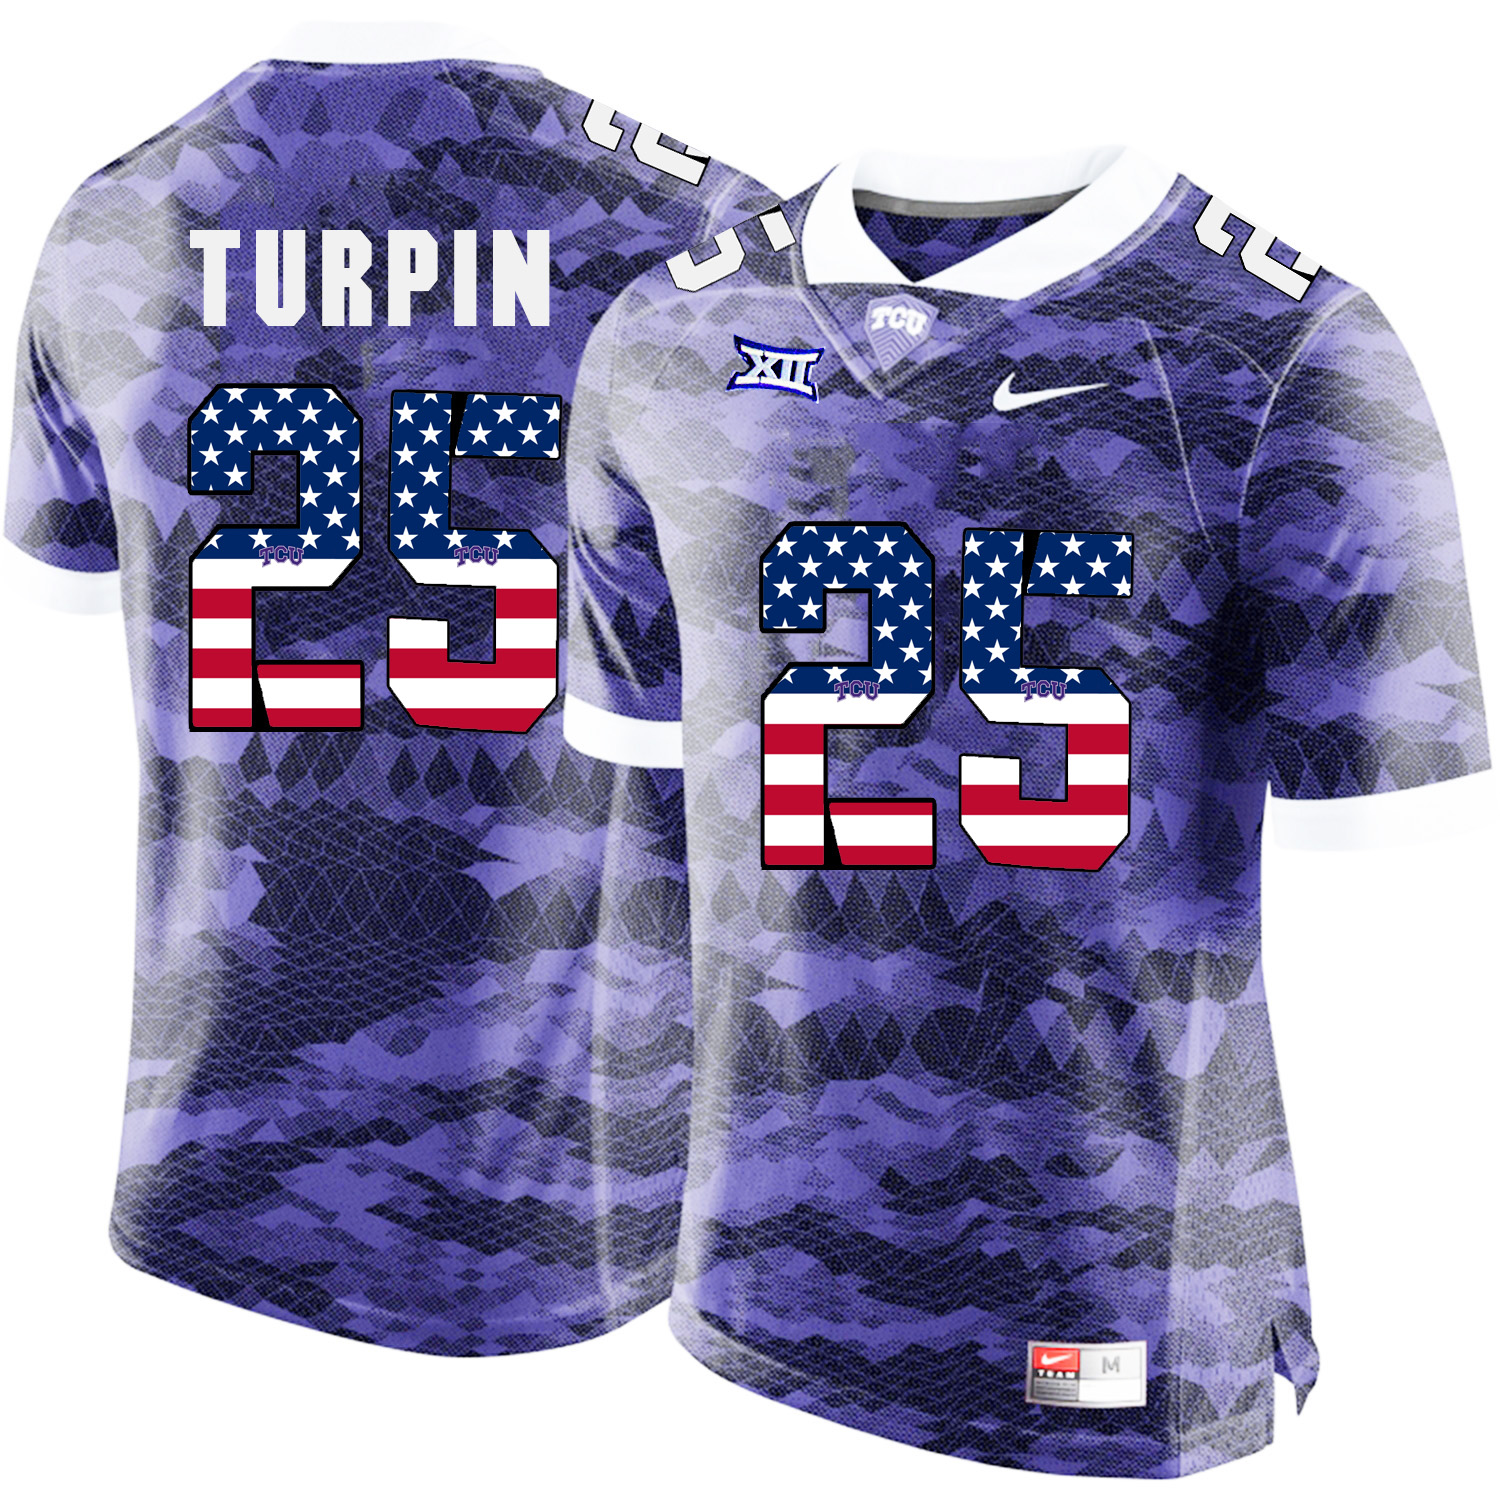 TCU Horned Frogs 25 TURPIN Purple USA Flag College Football Jersey